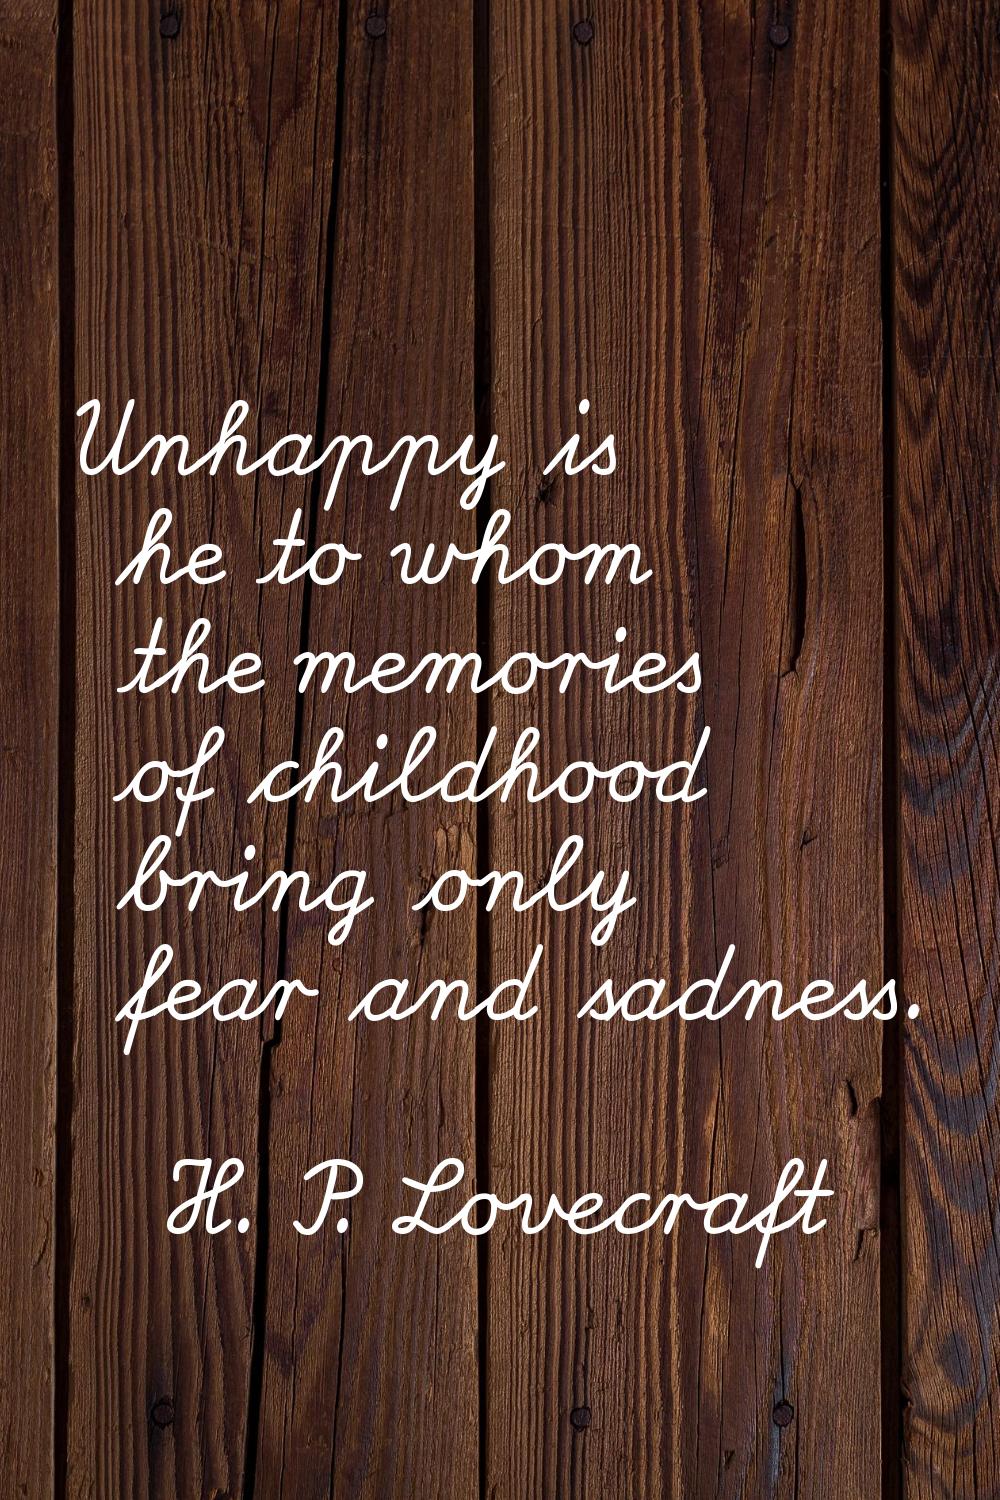 Unhappy is he to whom the memories of childhood bring only fear and sadness.